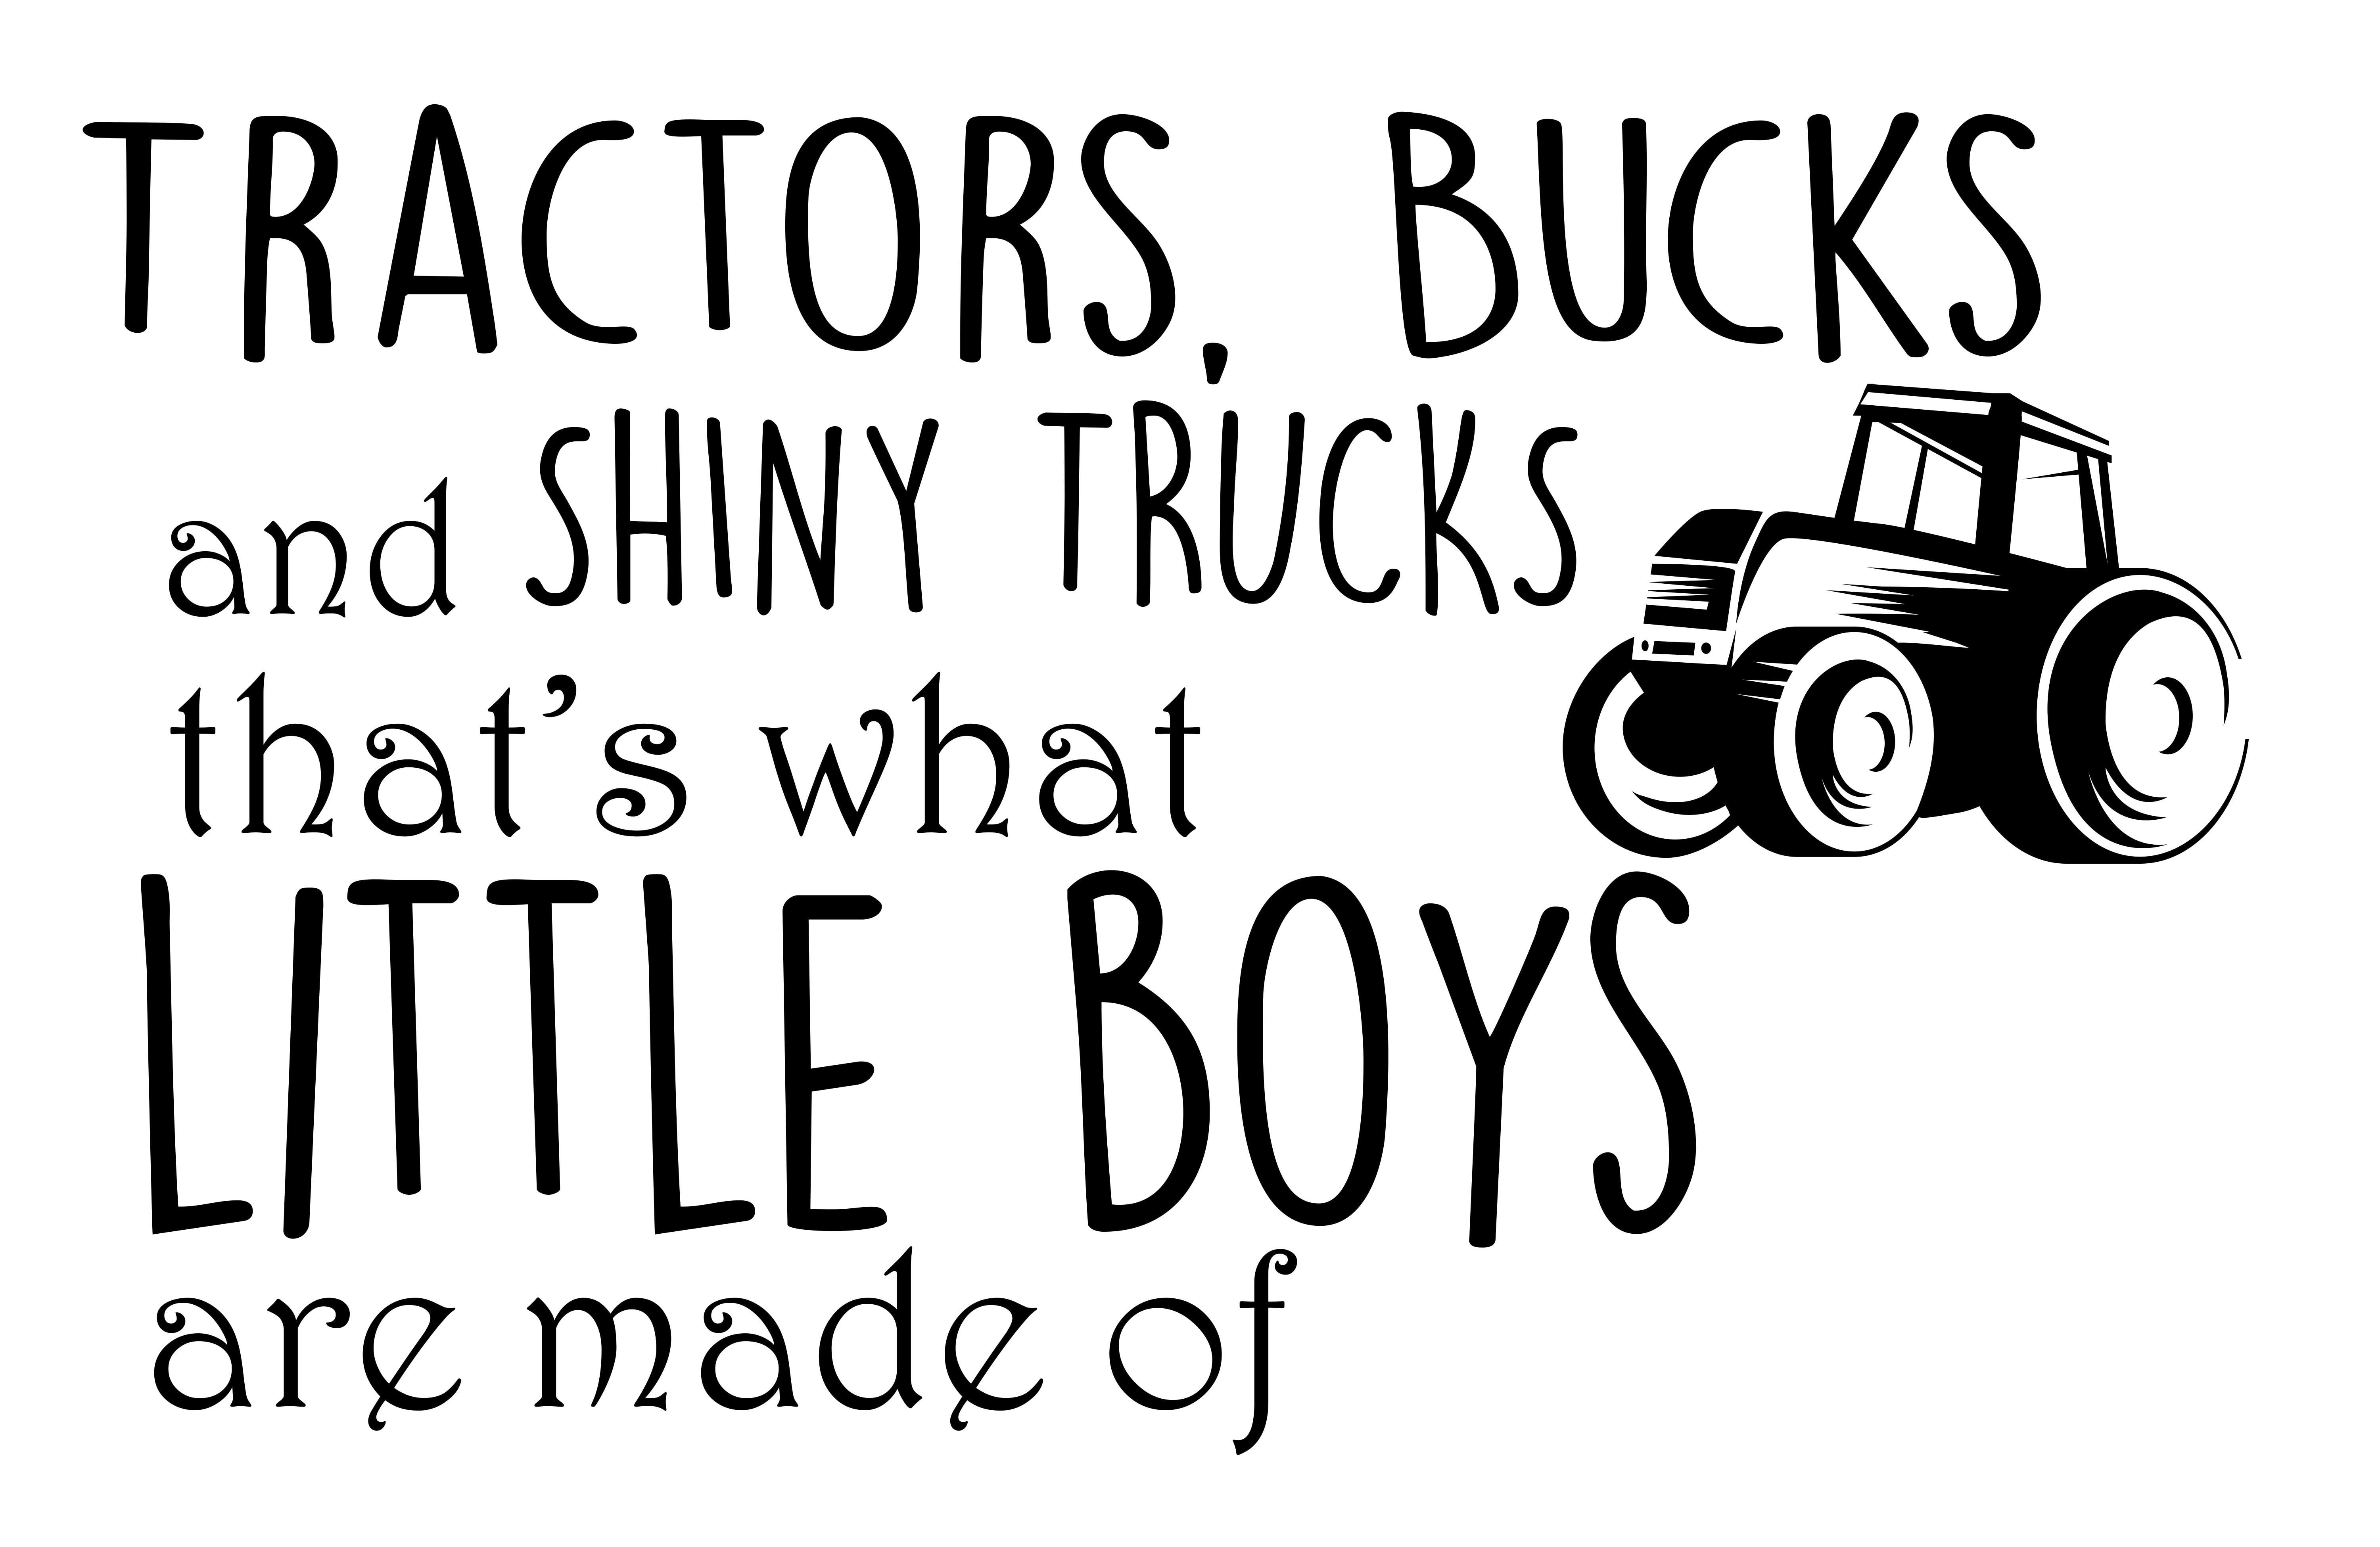 Wall Decal Quote Tractors Bucks and Shiny Trucks Deer Antlers Car Dump NV130 